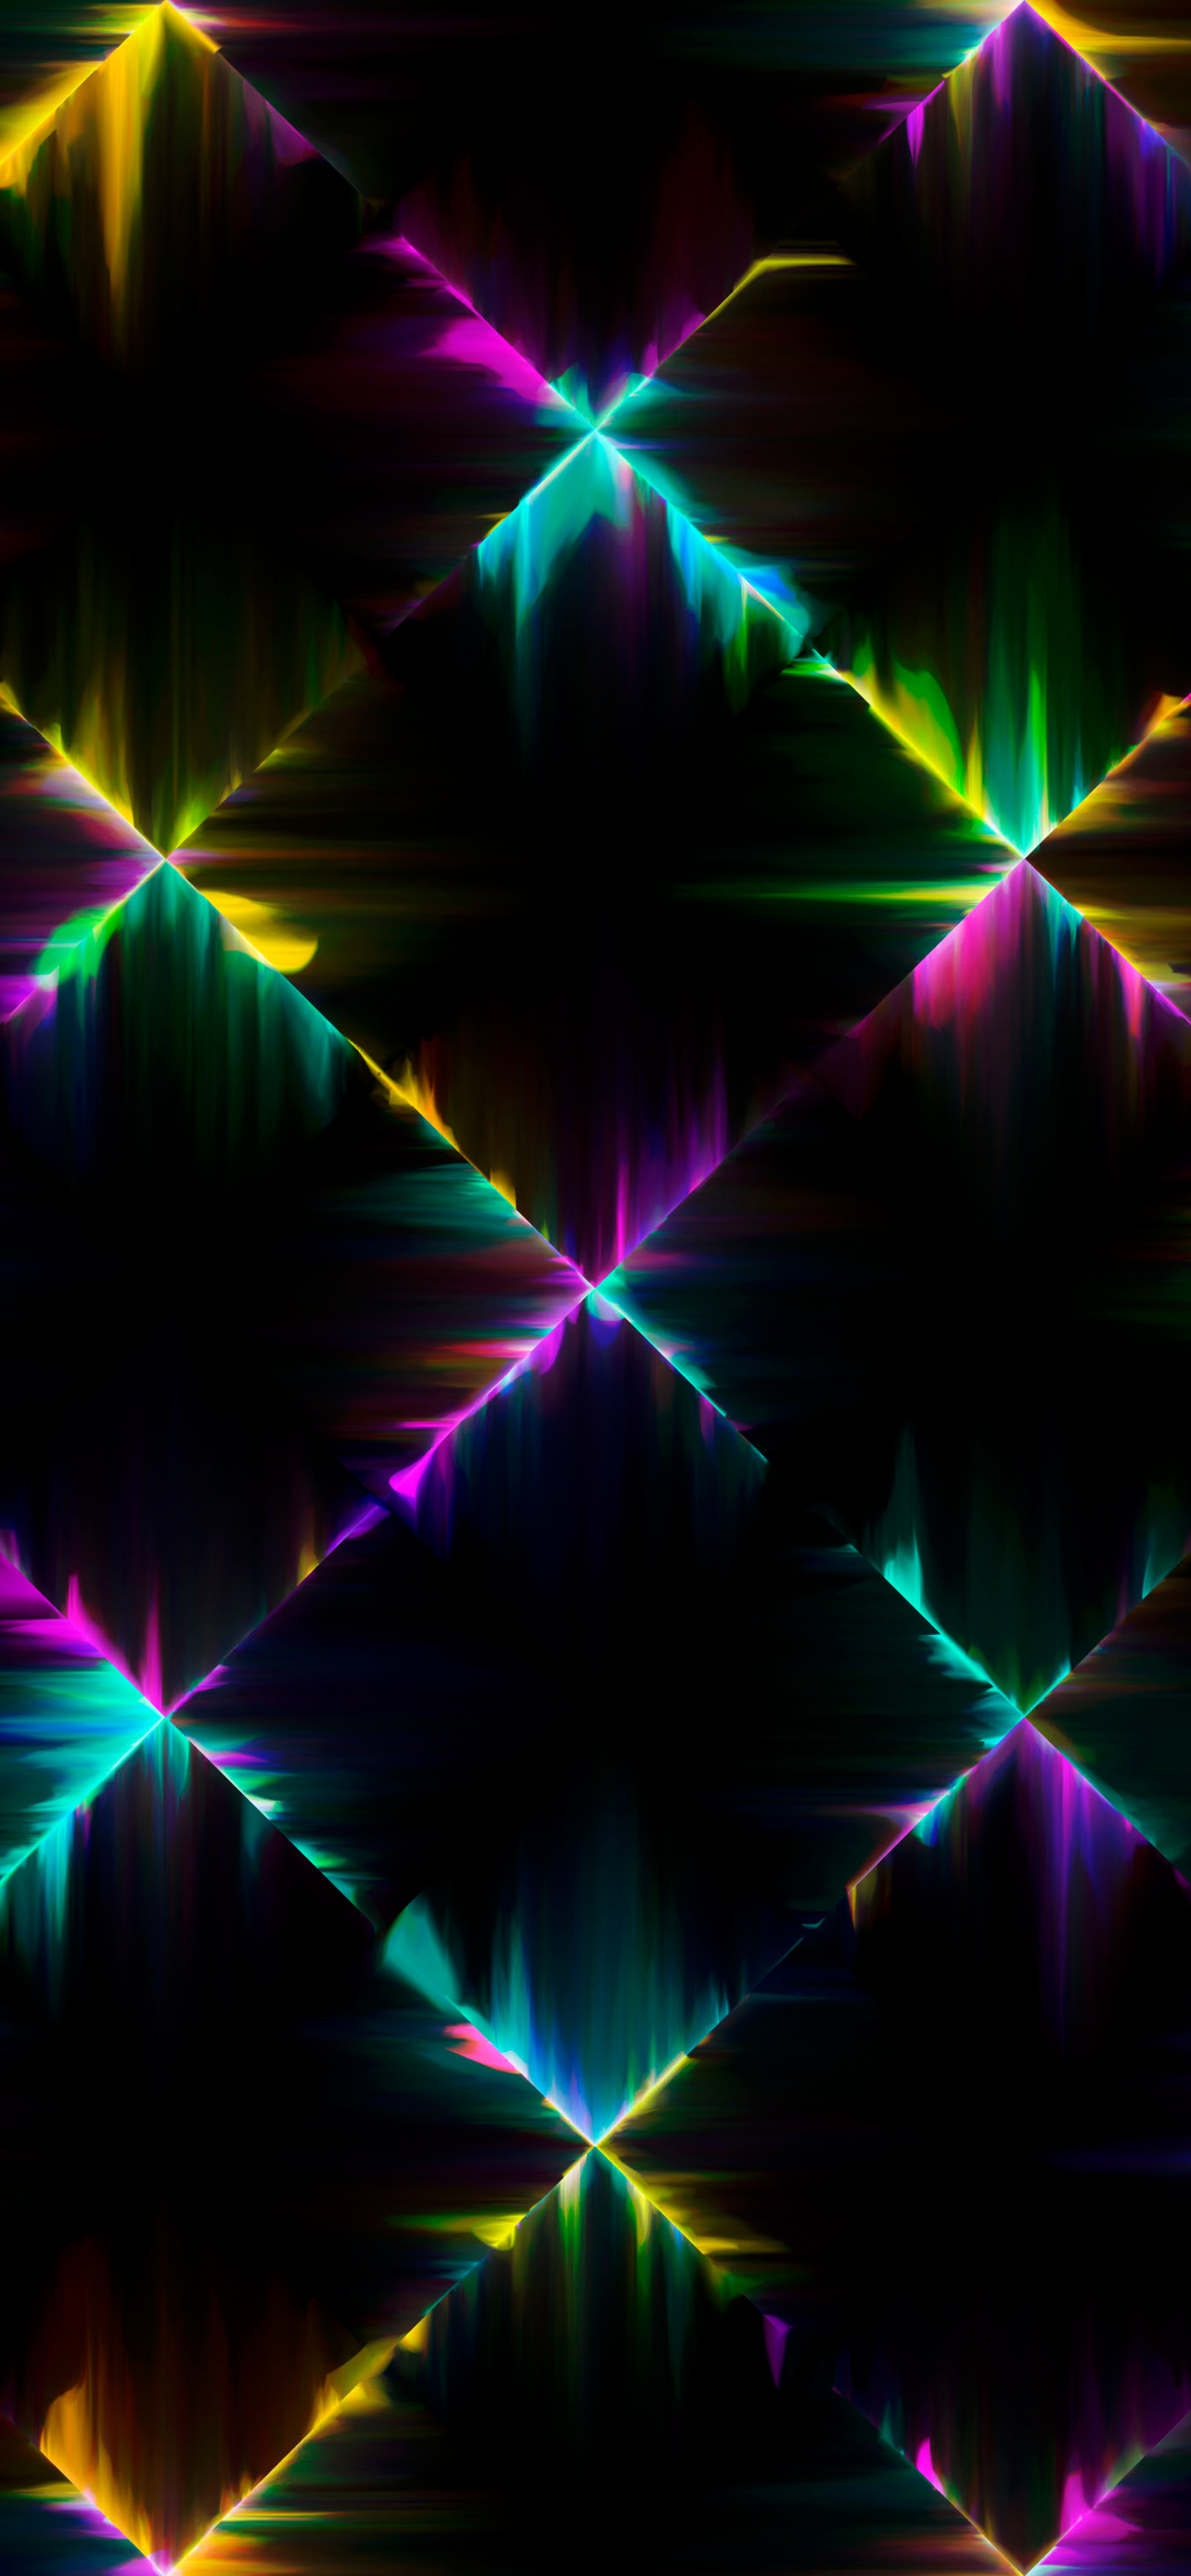 Neon Lights Wallpaper 4K, Colorful, Abstract, #1